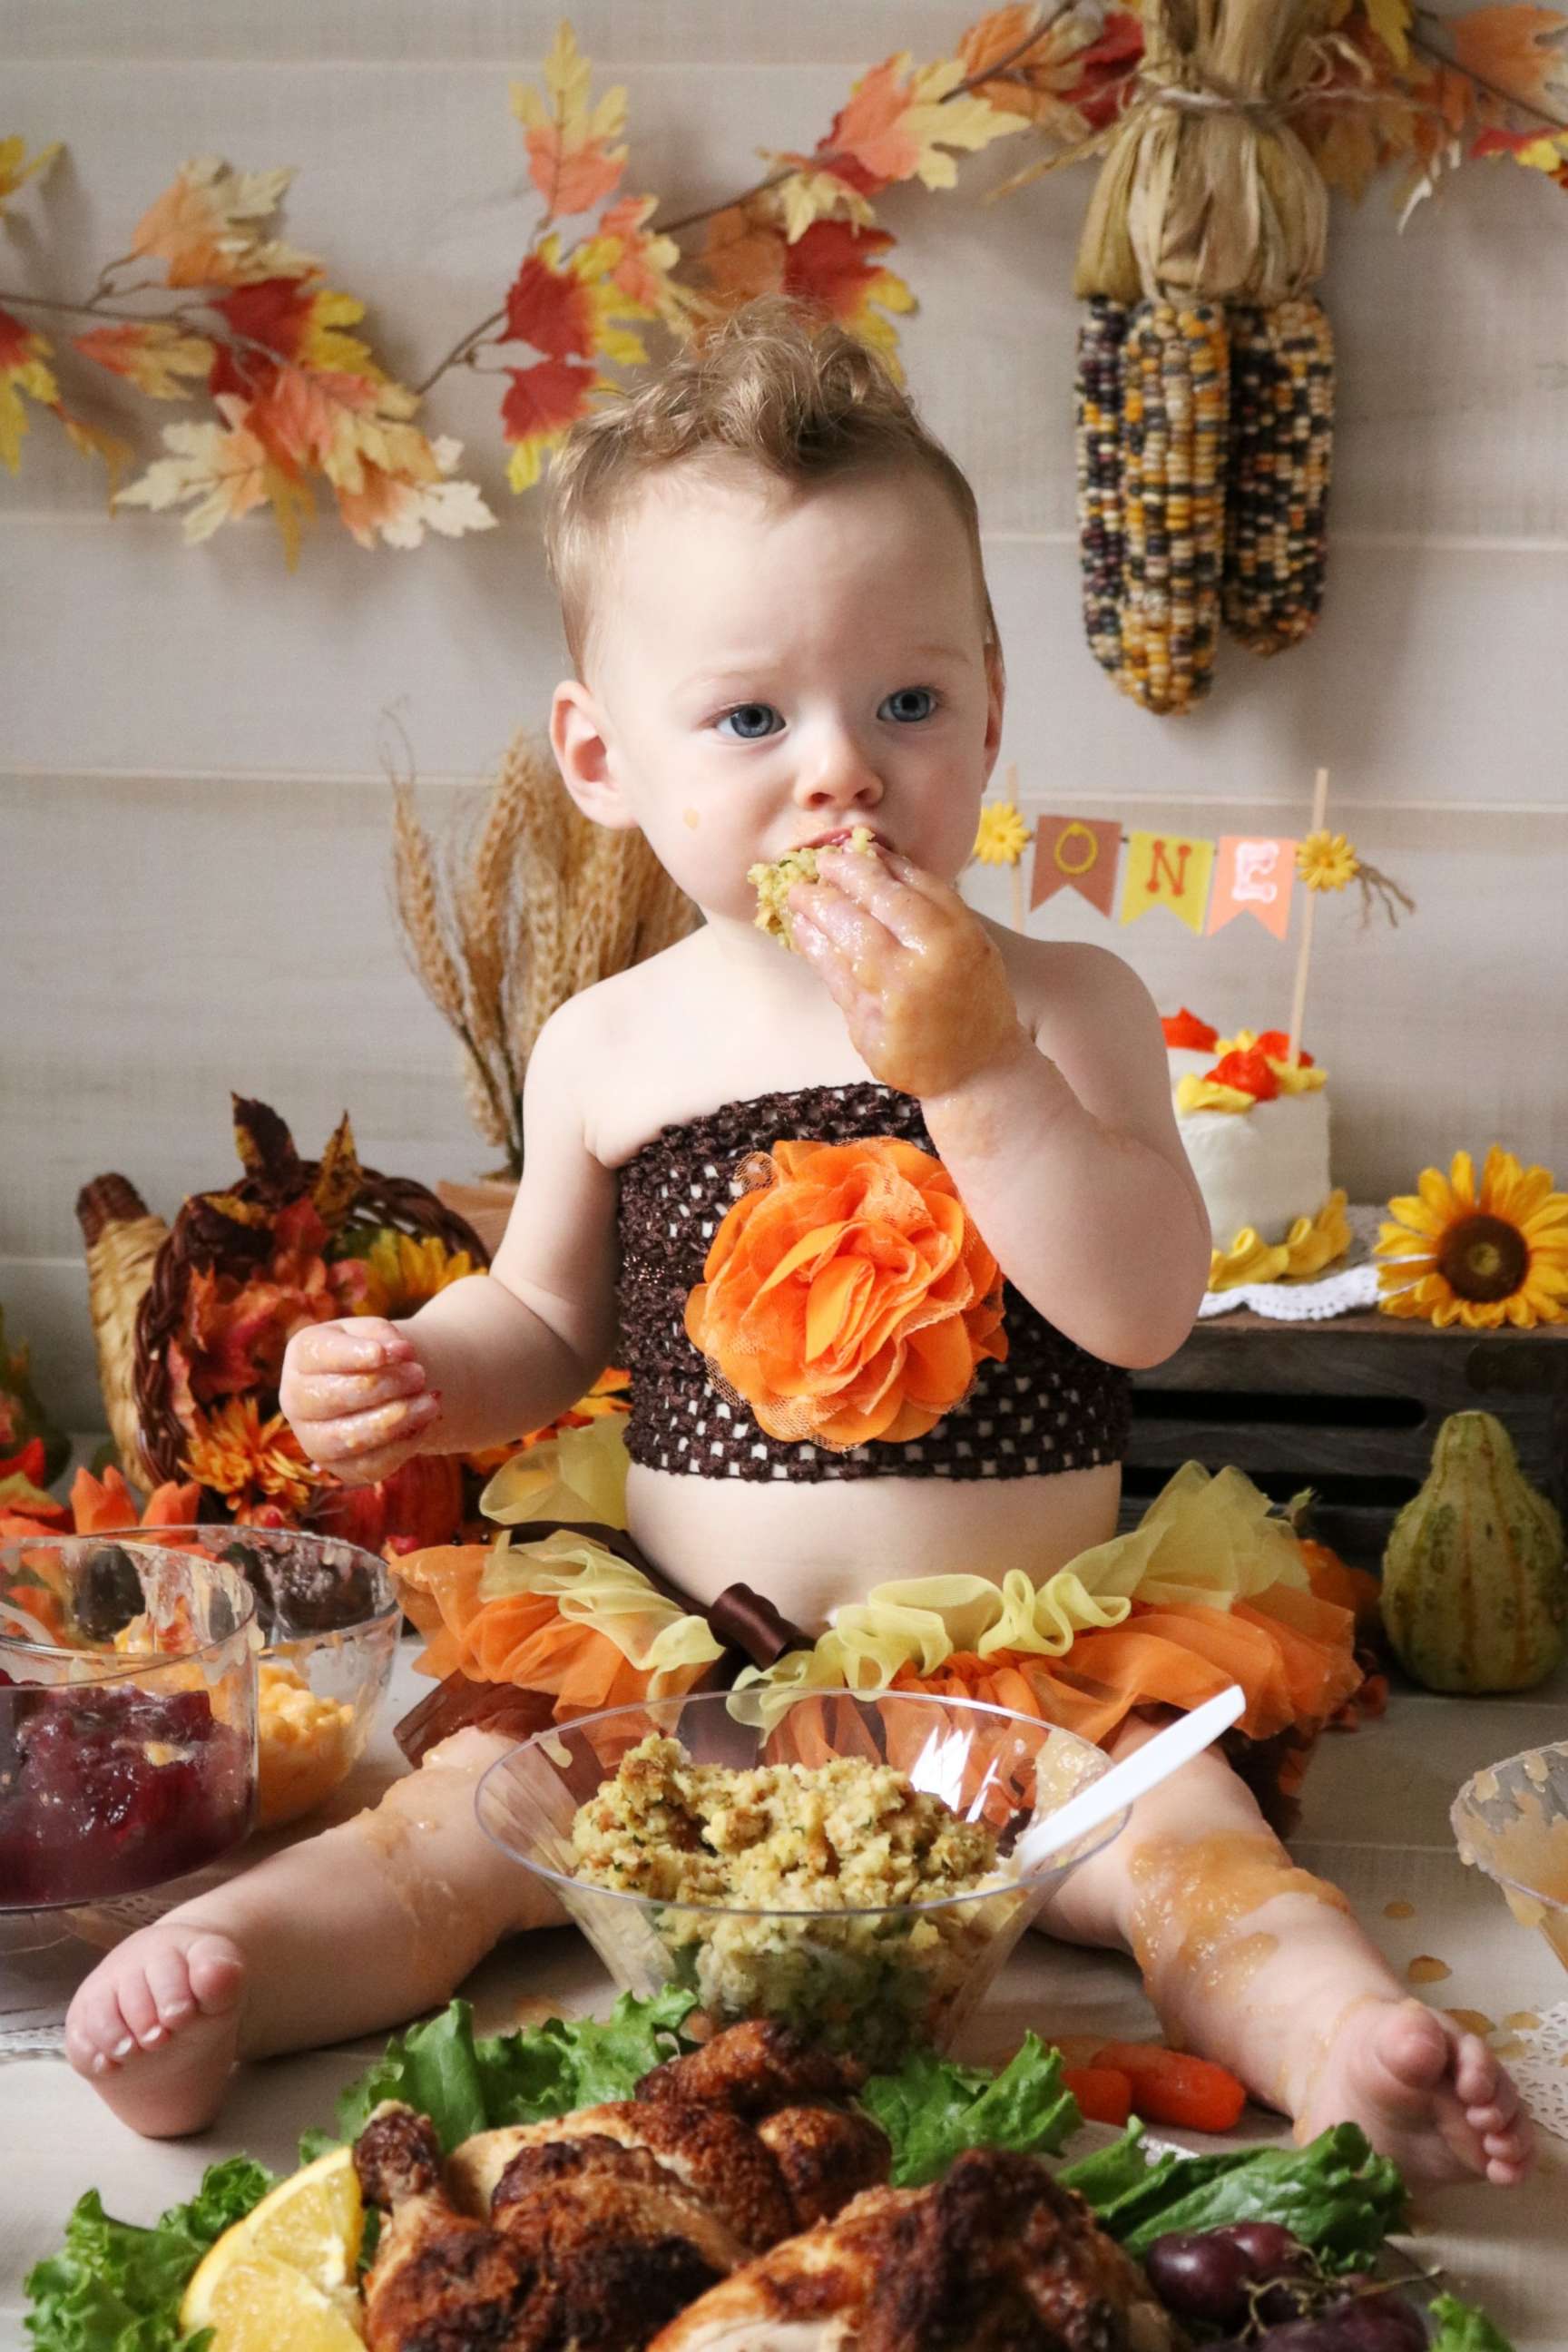 PHOTO: Stuffing and turkey made the perfect finger food for Aryana Donahue's birthday celebration.